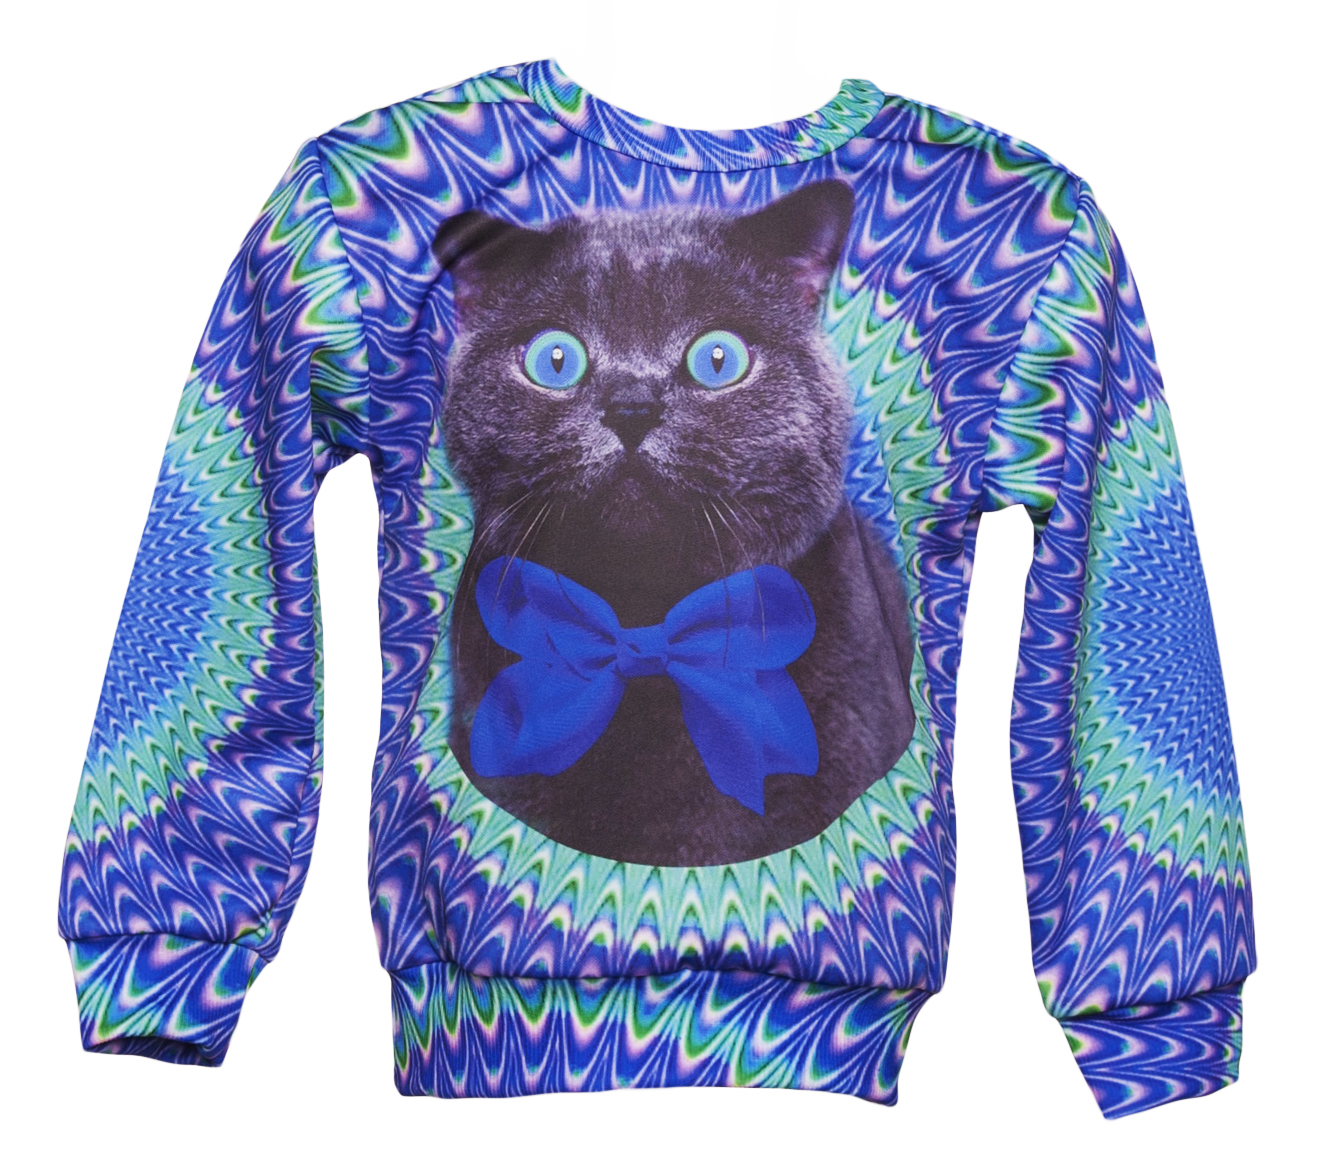 Kids Psychedelic Crazy Cat Jumper from Mr Gugu